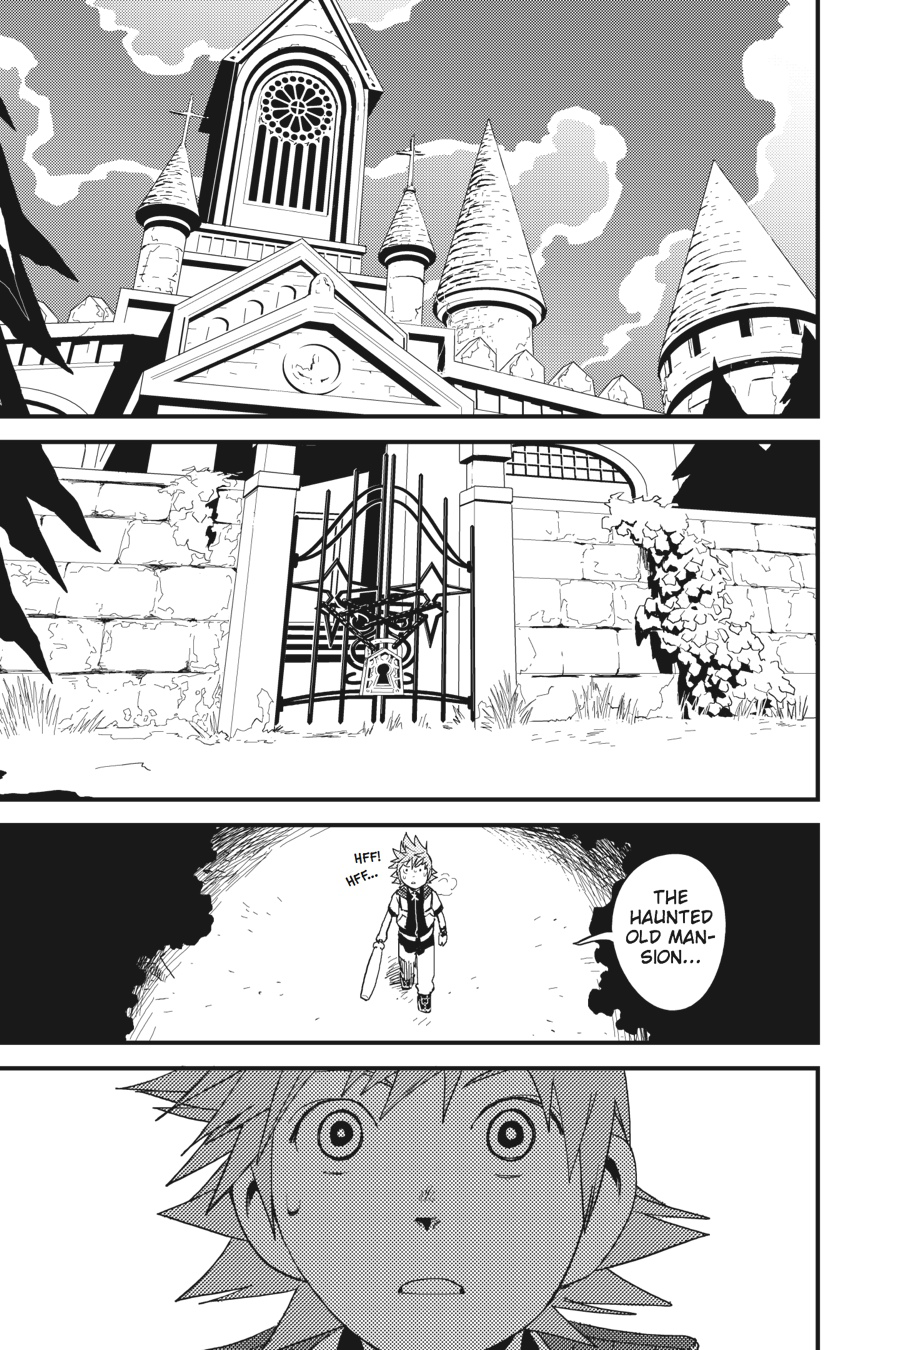 Read The First Chapter Of The Kingdom Hearts II Manga, Right Here For Free